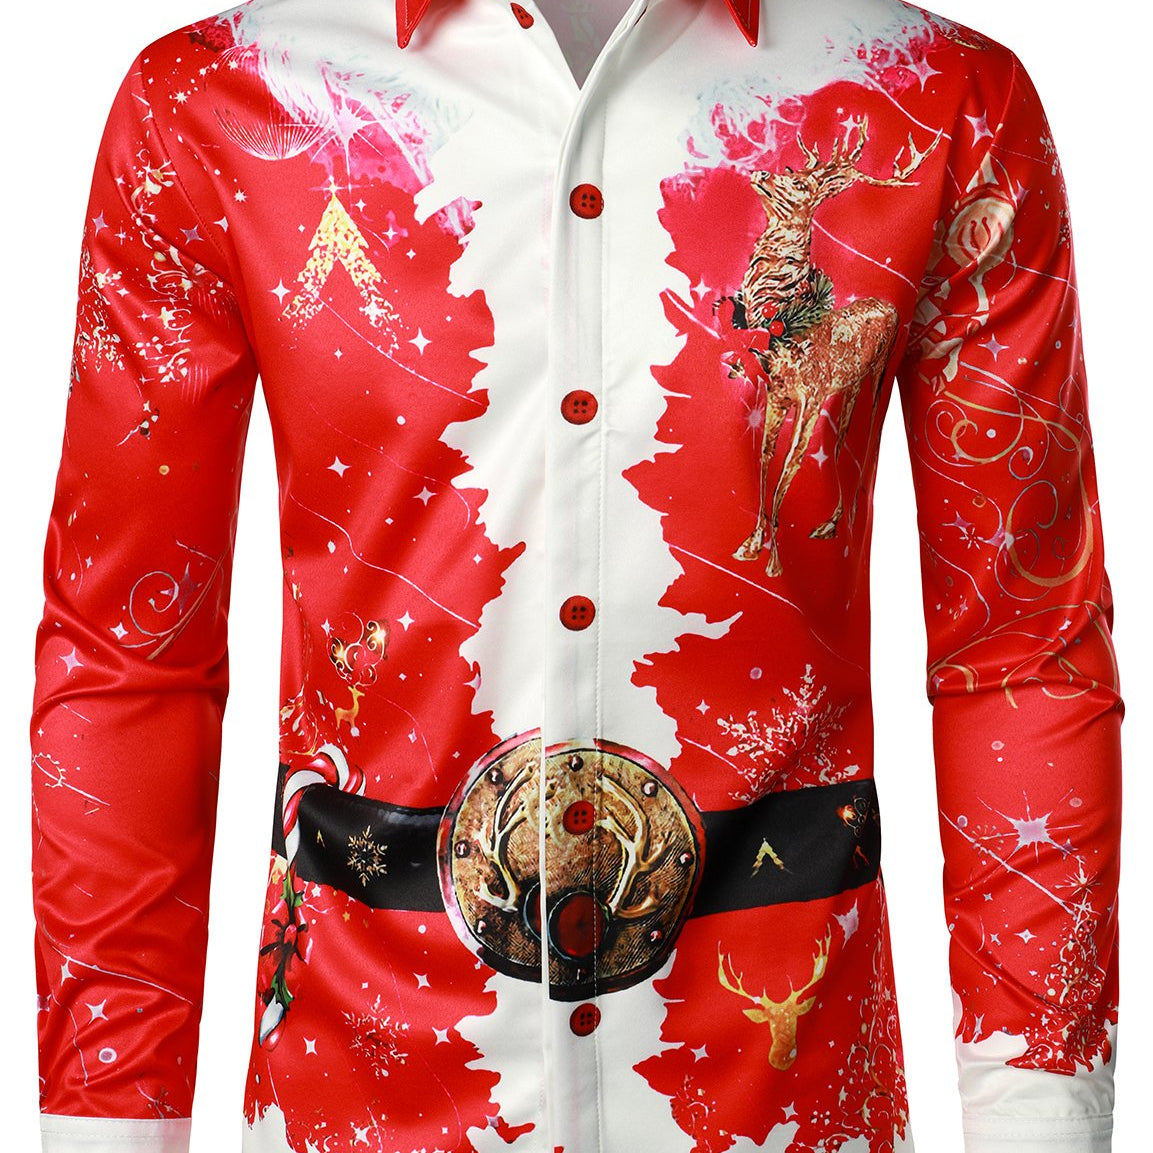 Men's Christmas Themed Santa Top Red Funny Outfit Holiday Button Long Sleeve Shirt